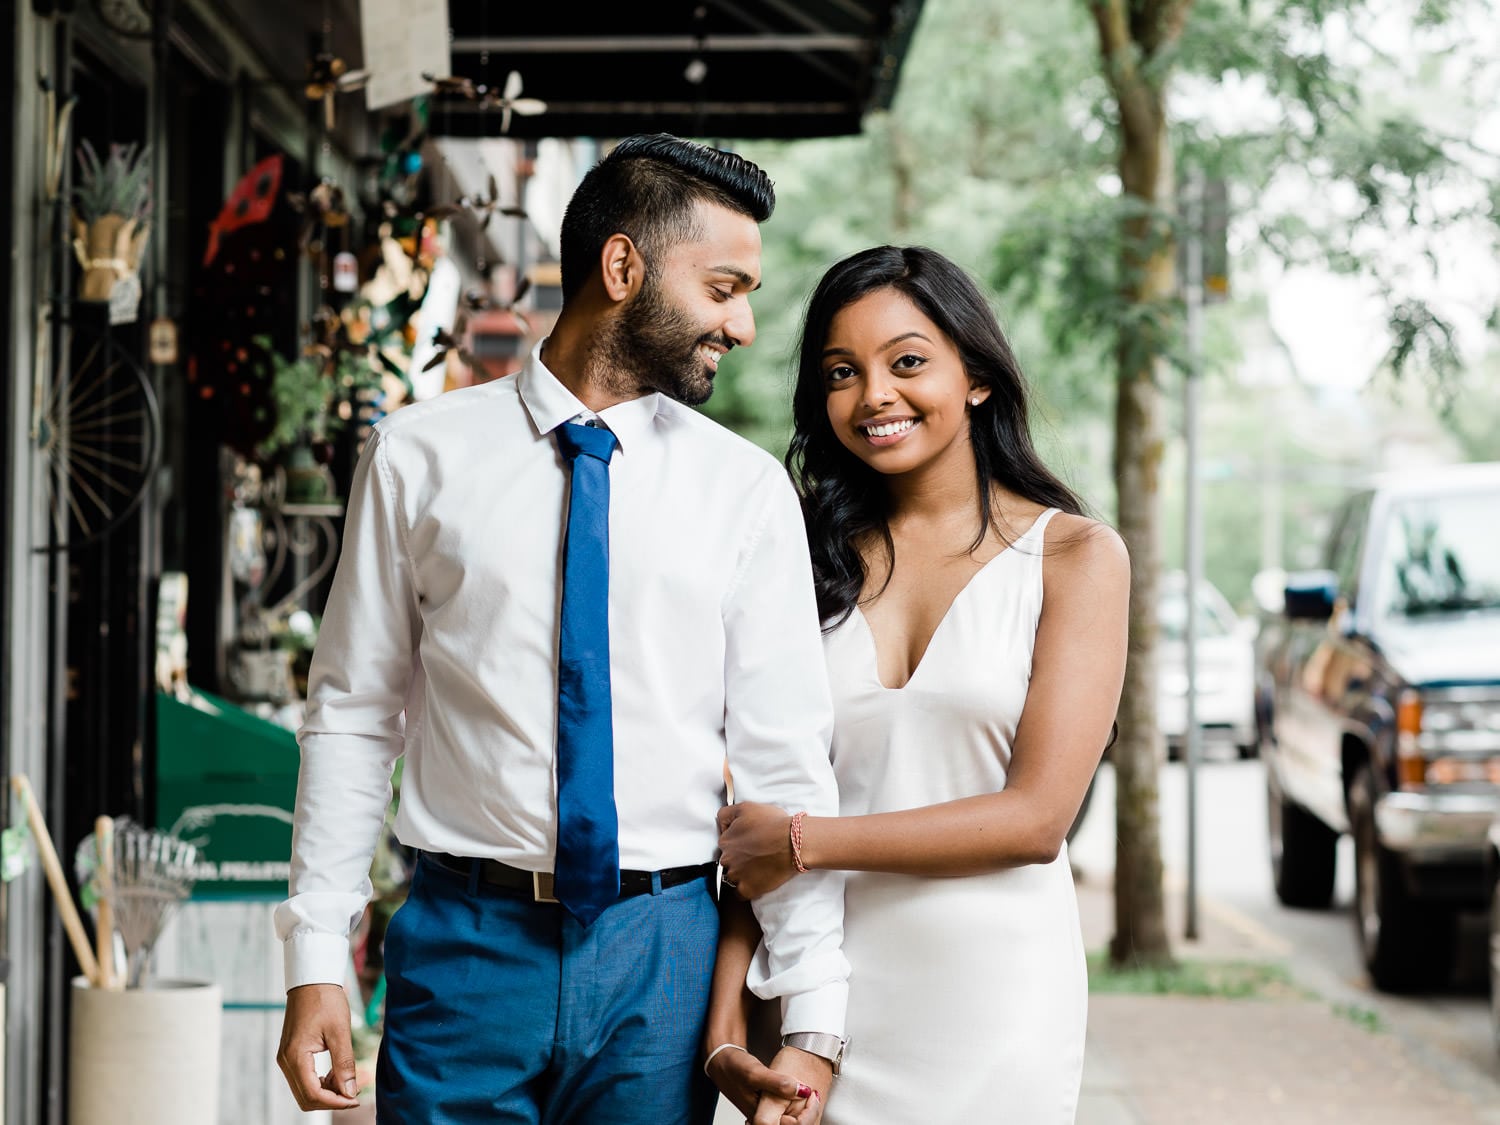 Fort Langley Engagement | Vancouver Indian Wedding Photographer